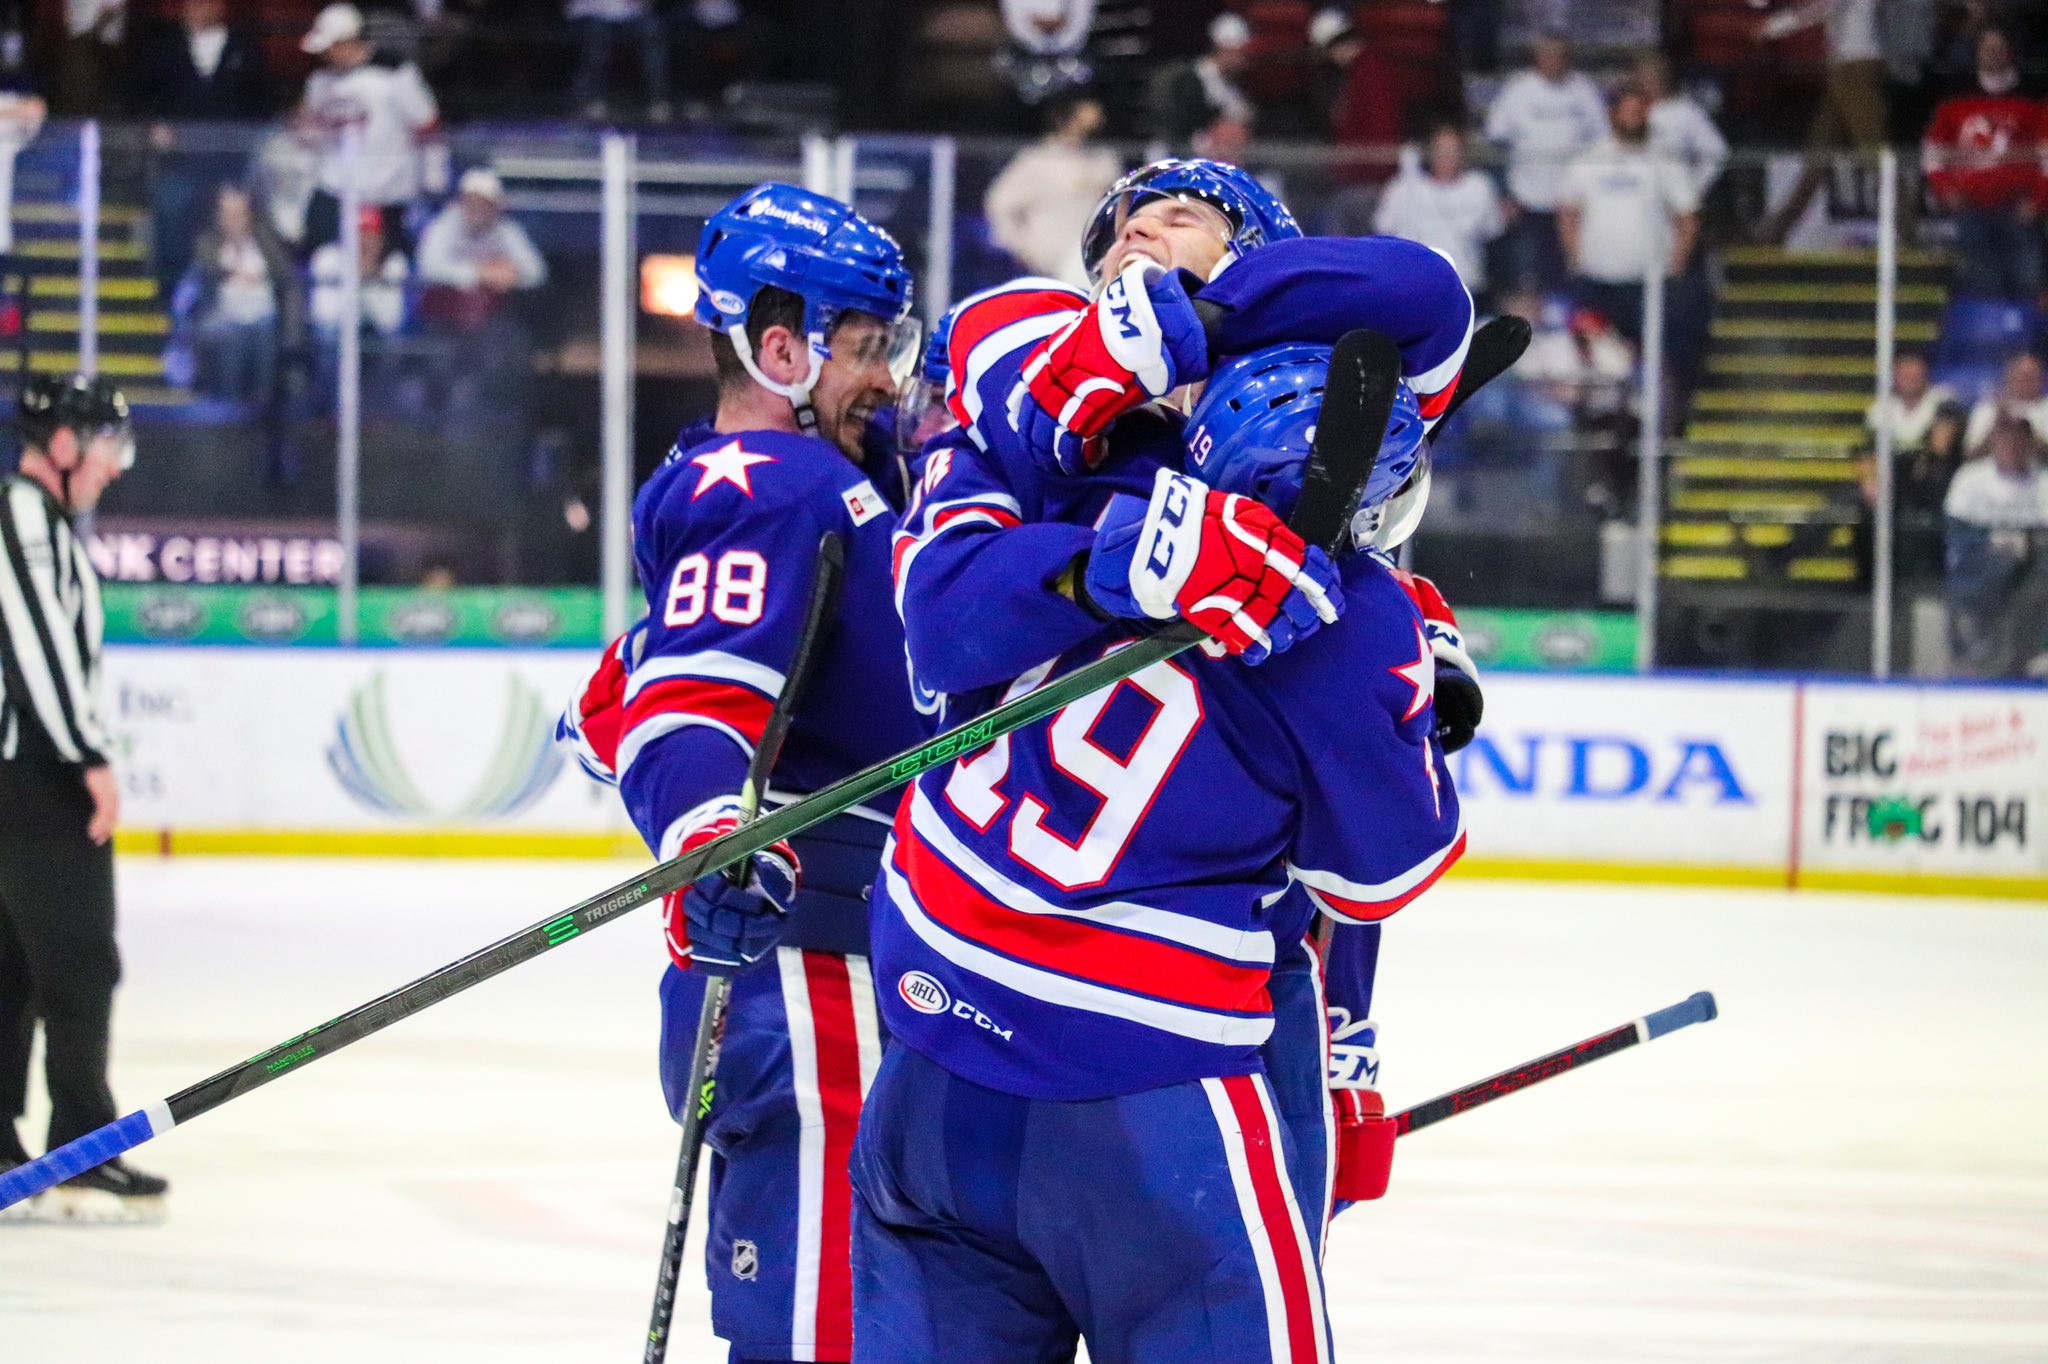 Amerks rally to top Comets, advance to North Division Finals